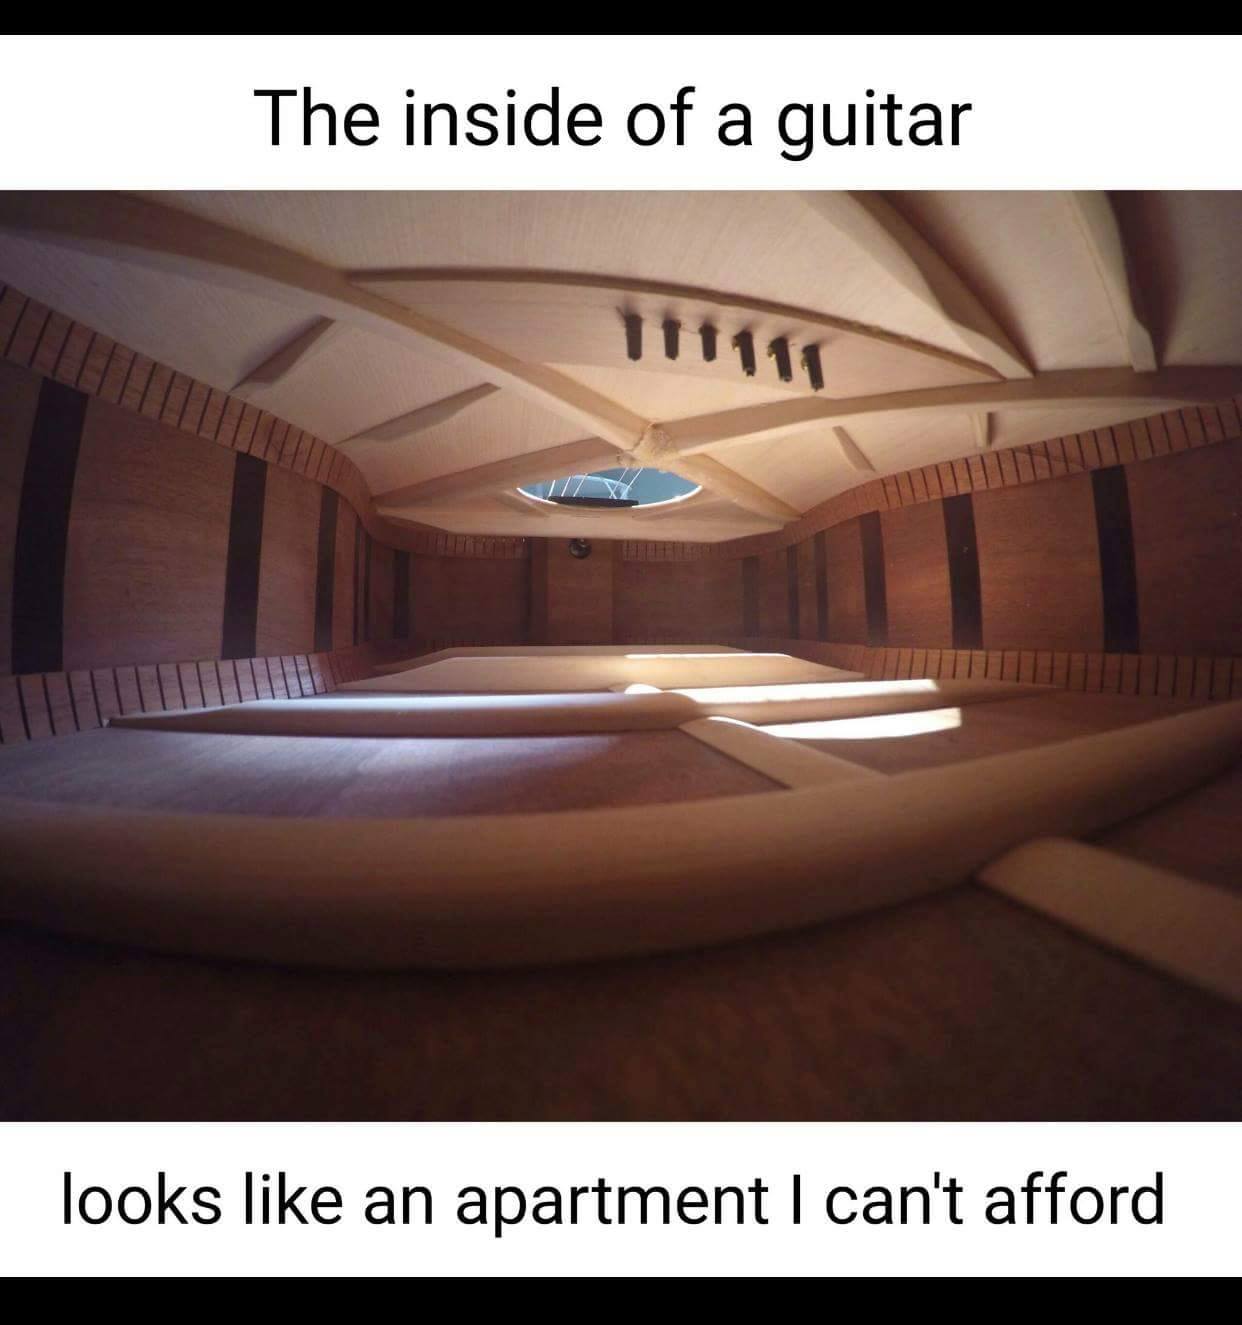 The inside of a guitar looks like an upscale apartment